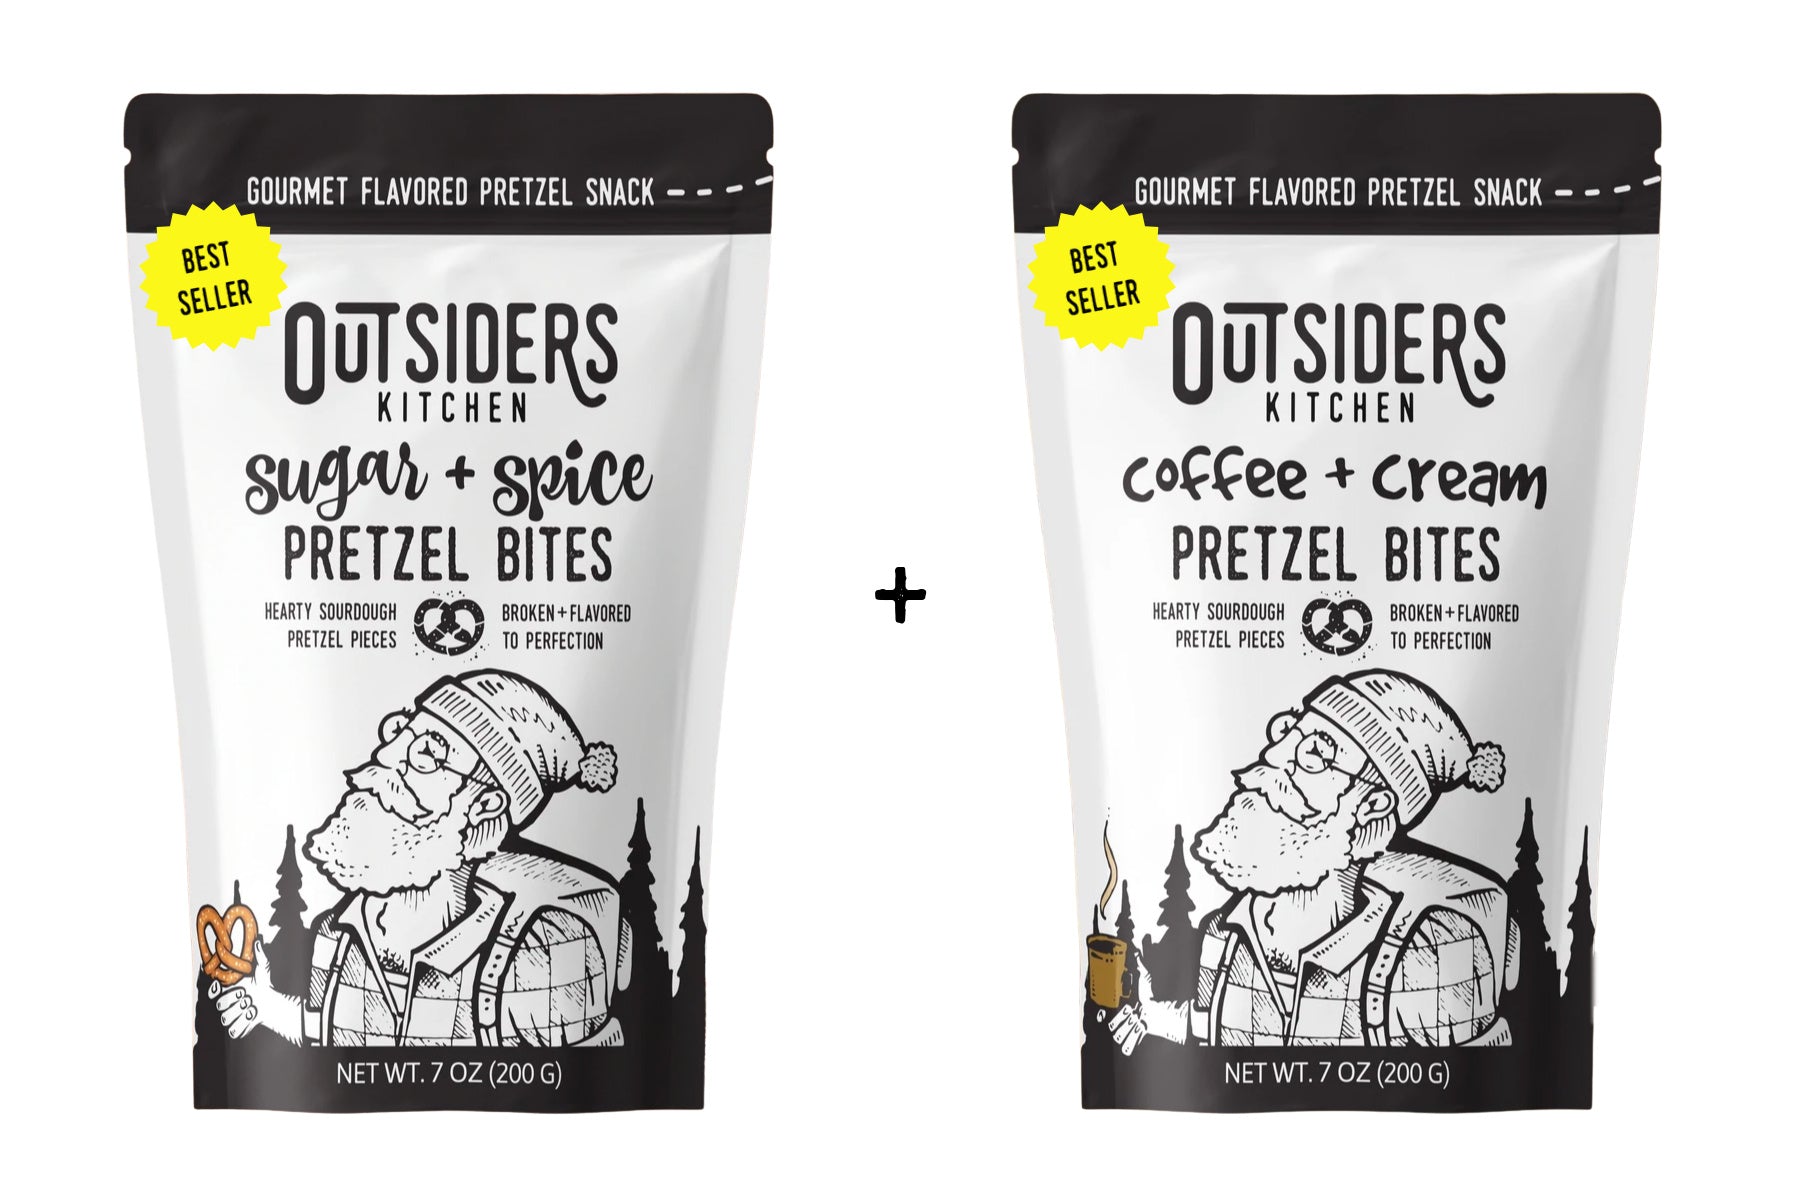 Best Sellers Case:  12 Bags of Sugar + Spice Pretzel Bites and 12 Bags of Coffee + Cream Pretzel Bites (total of 24 7 oz. bags)